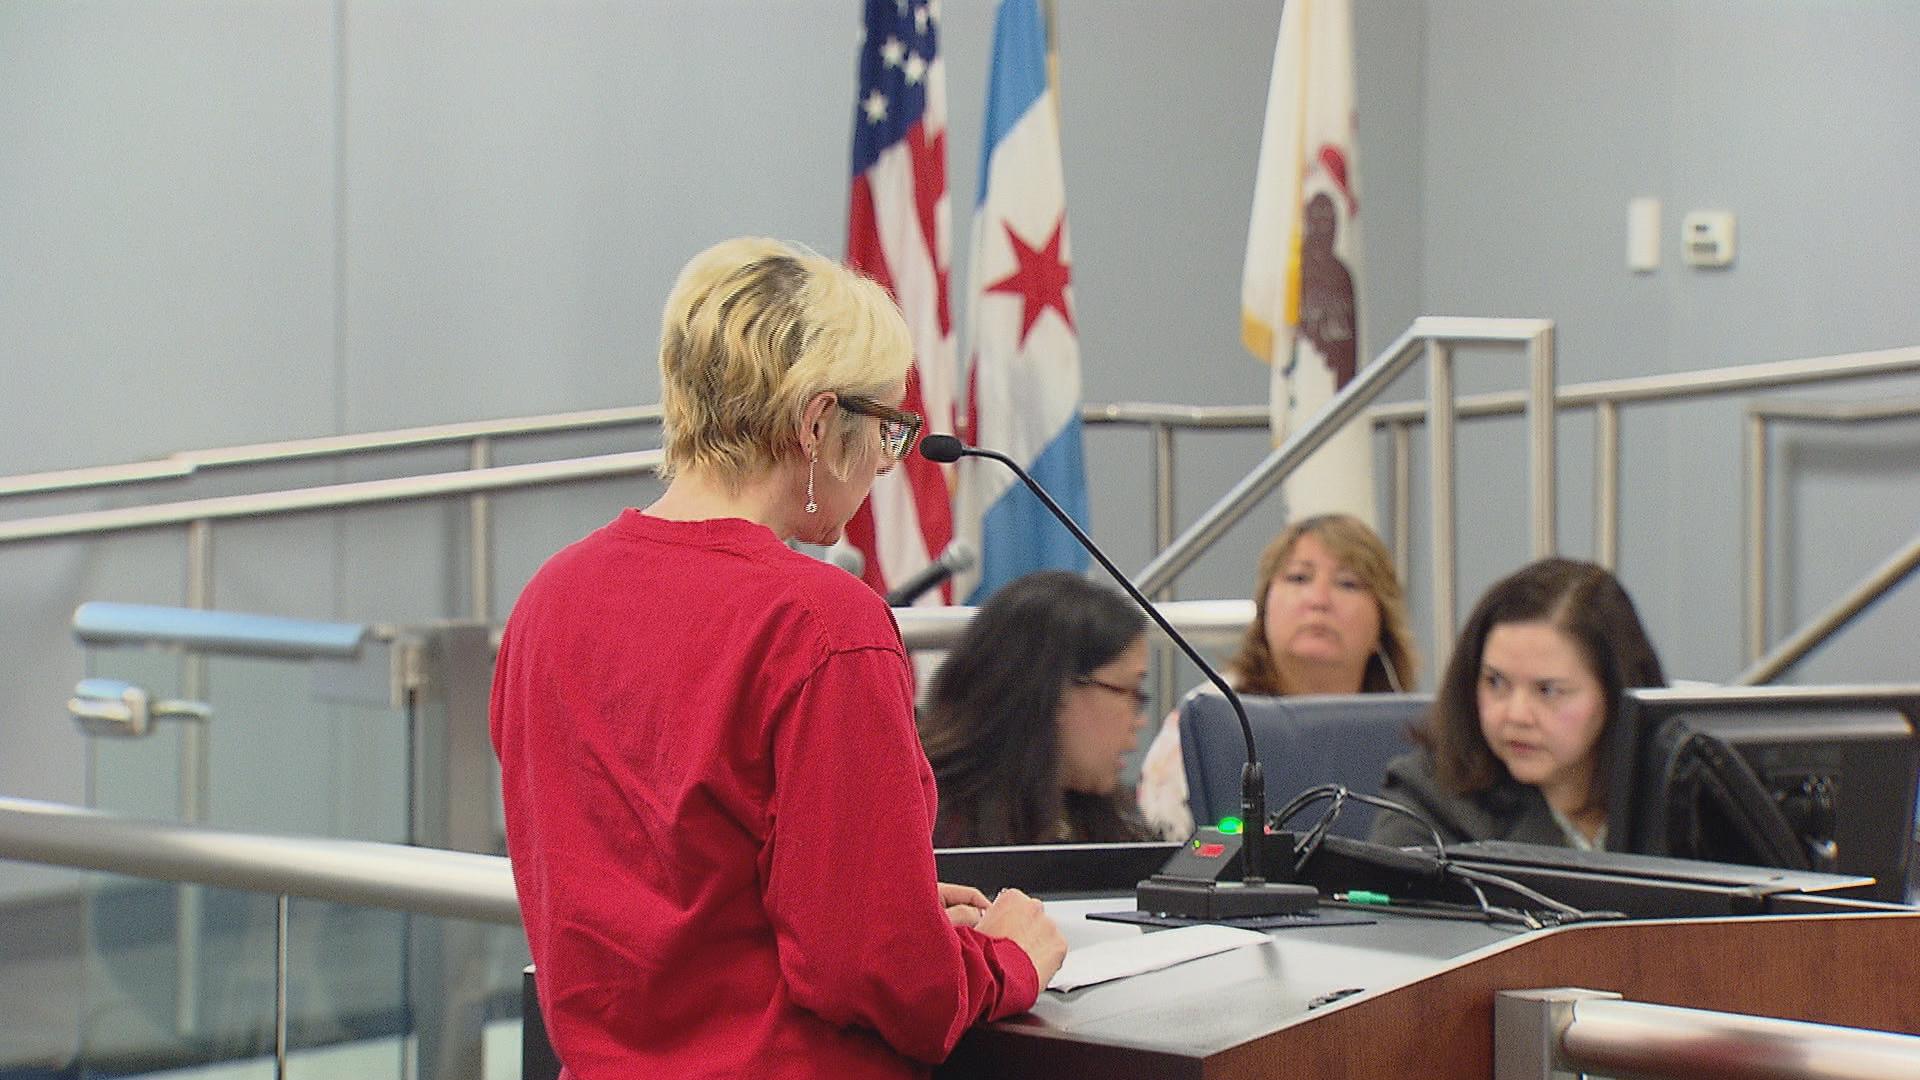 Catherine Henchek tells the Board of Education at a meeting Monday it needs to consider new revenue sources to ensure students and teachers receive the resources they need. (Chicago Tonight)